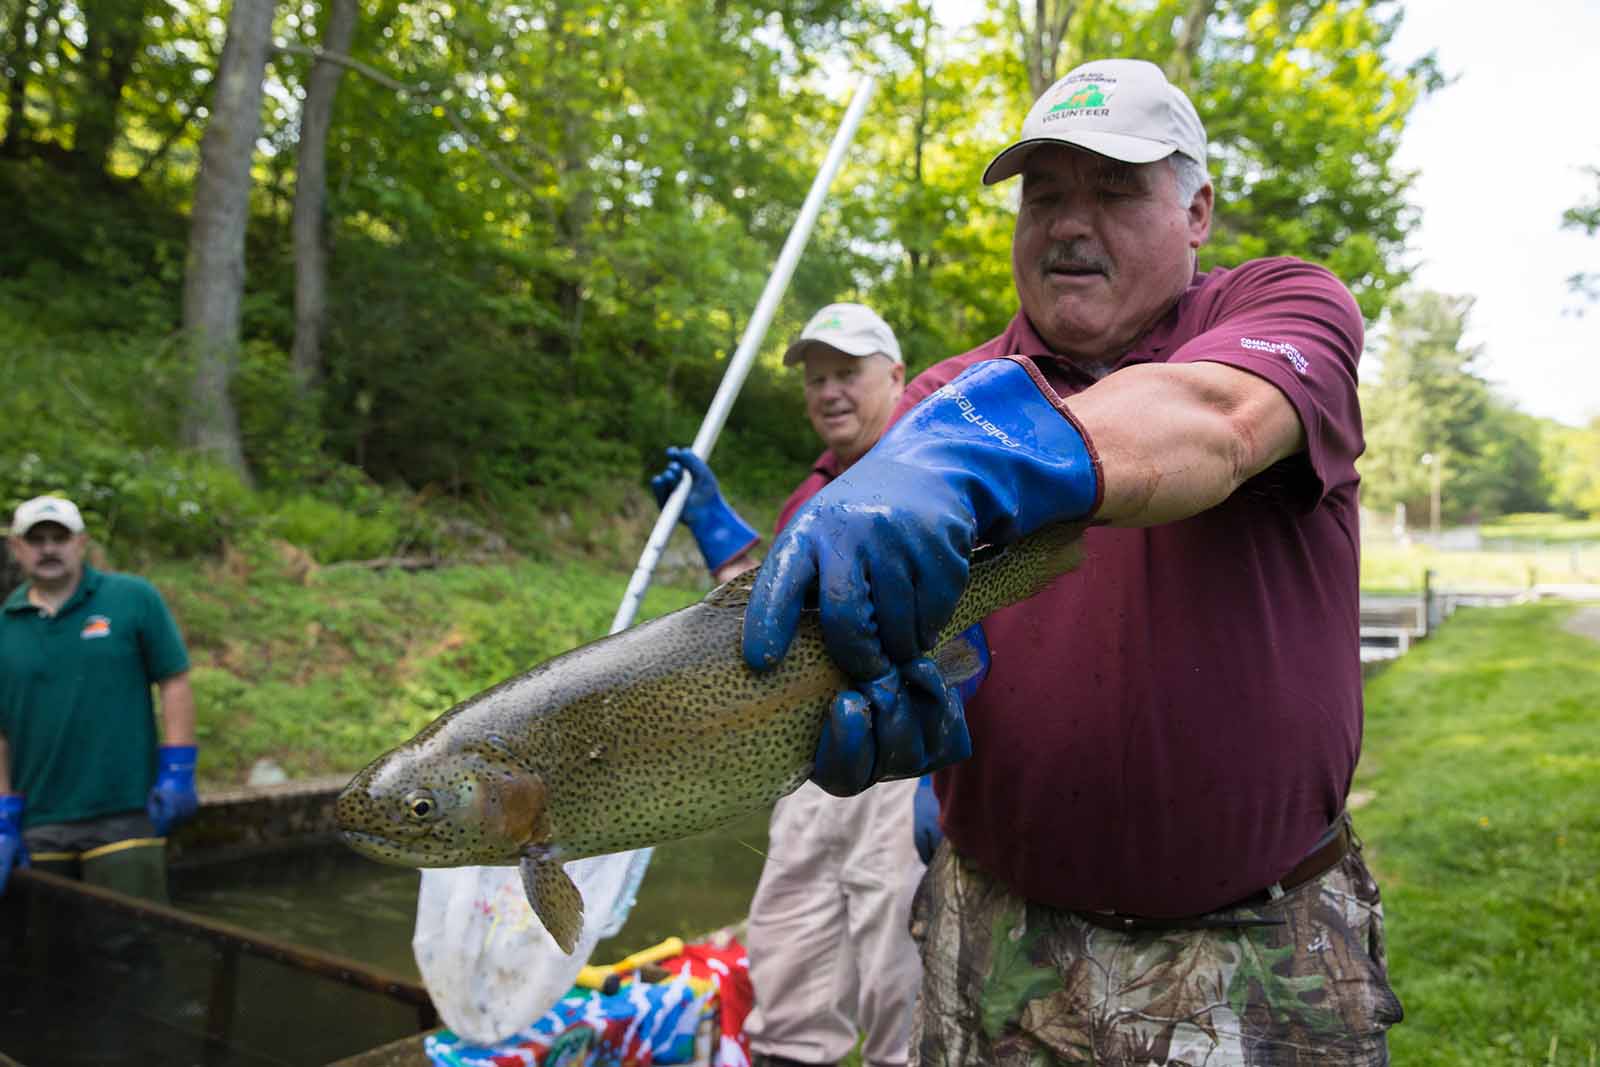 A volunteer wearing thick gloves holding a trout